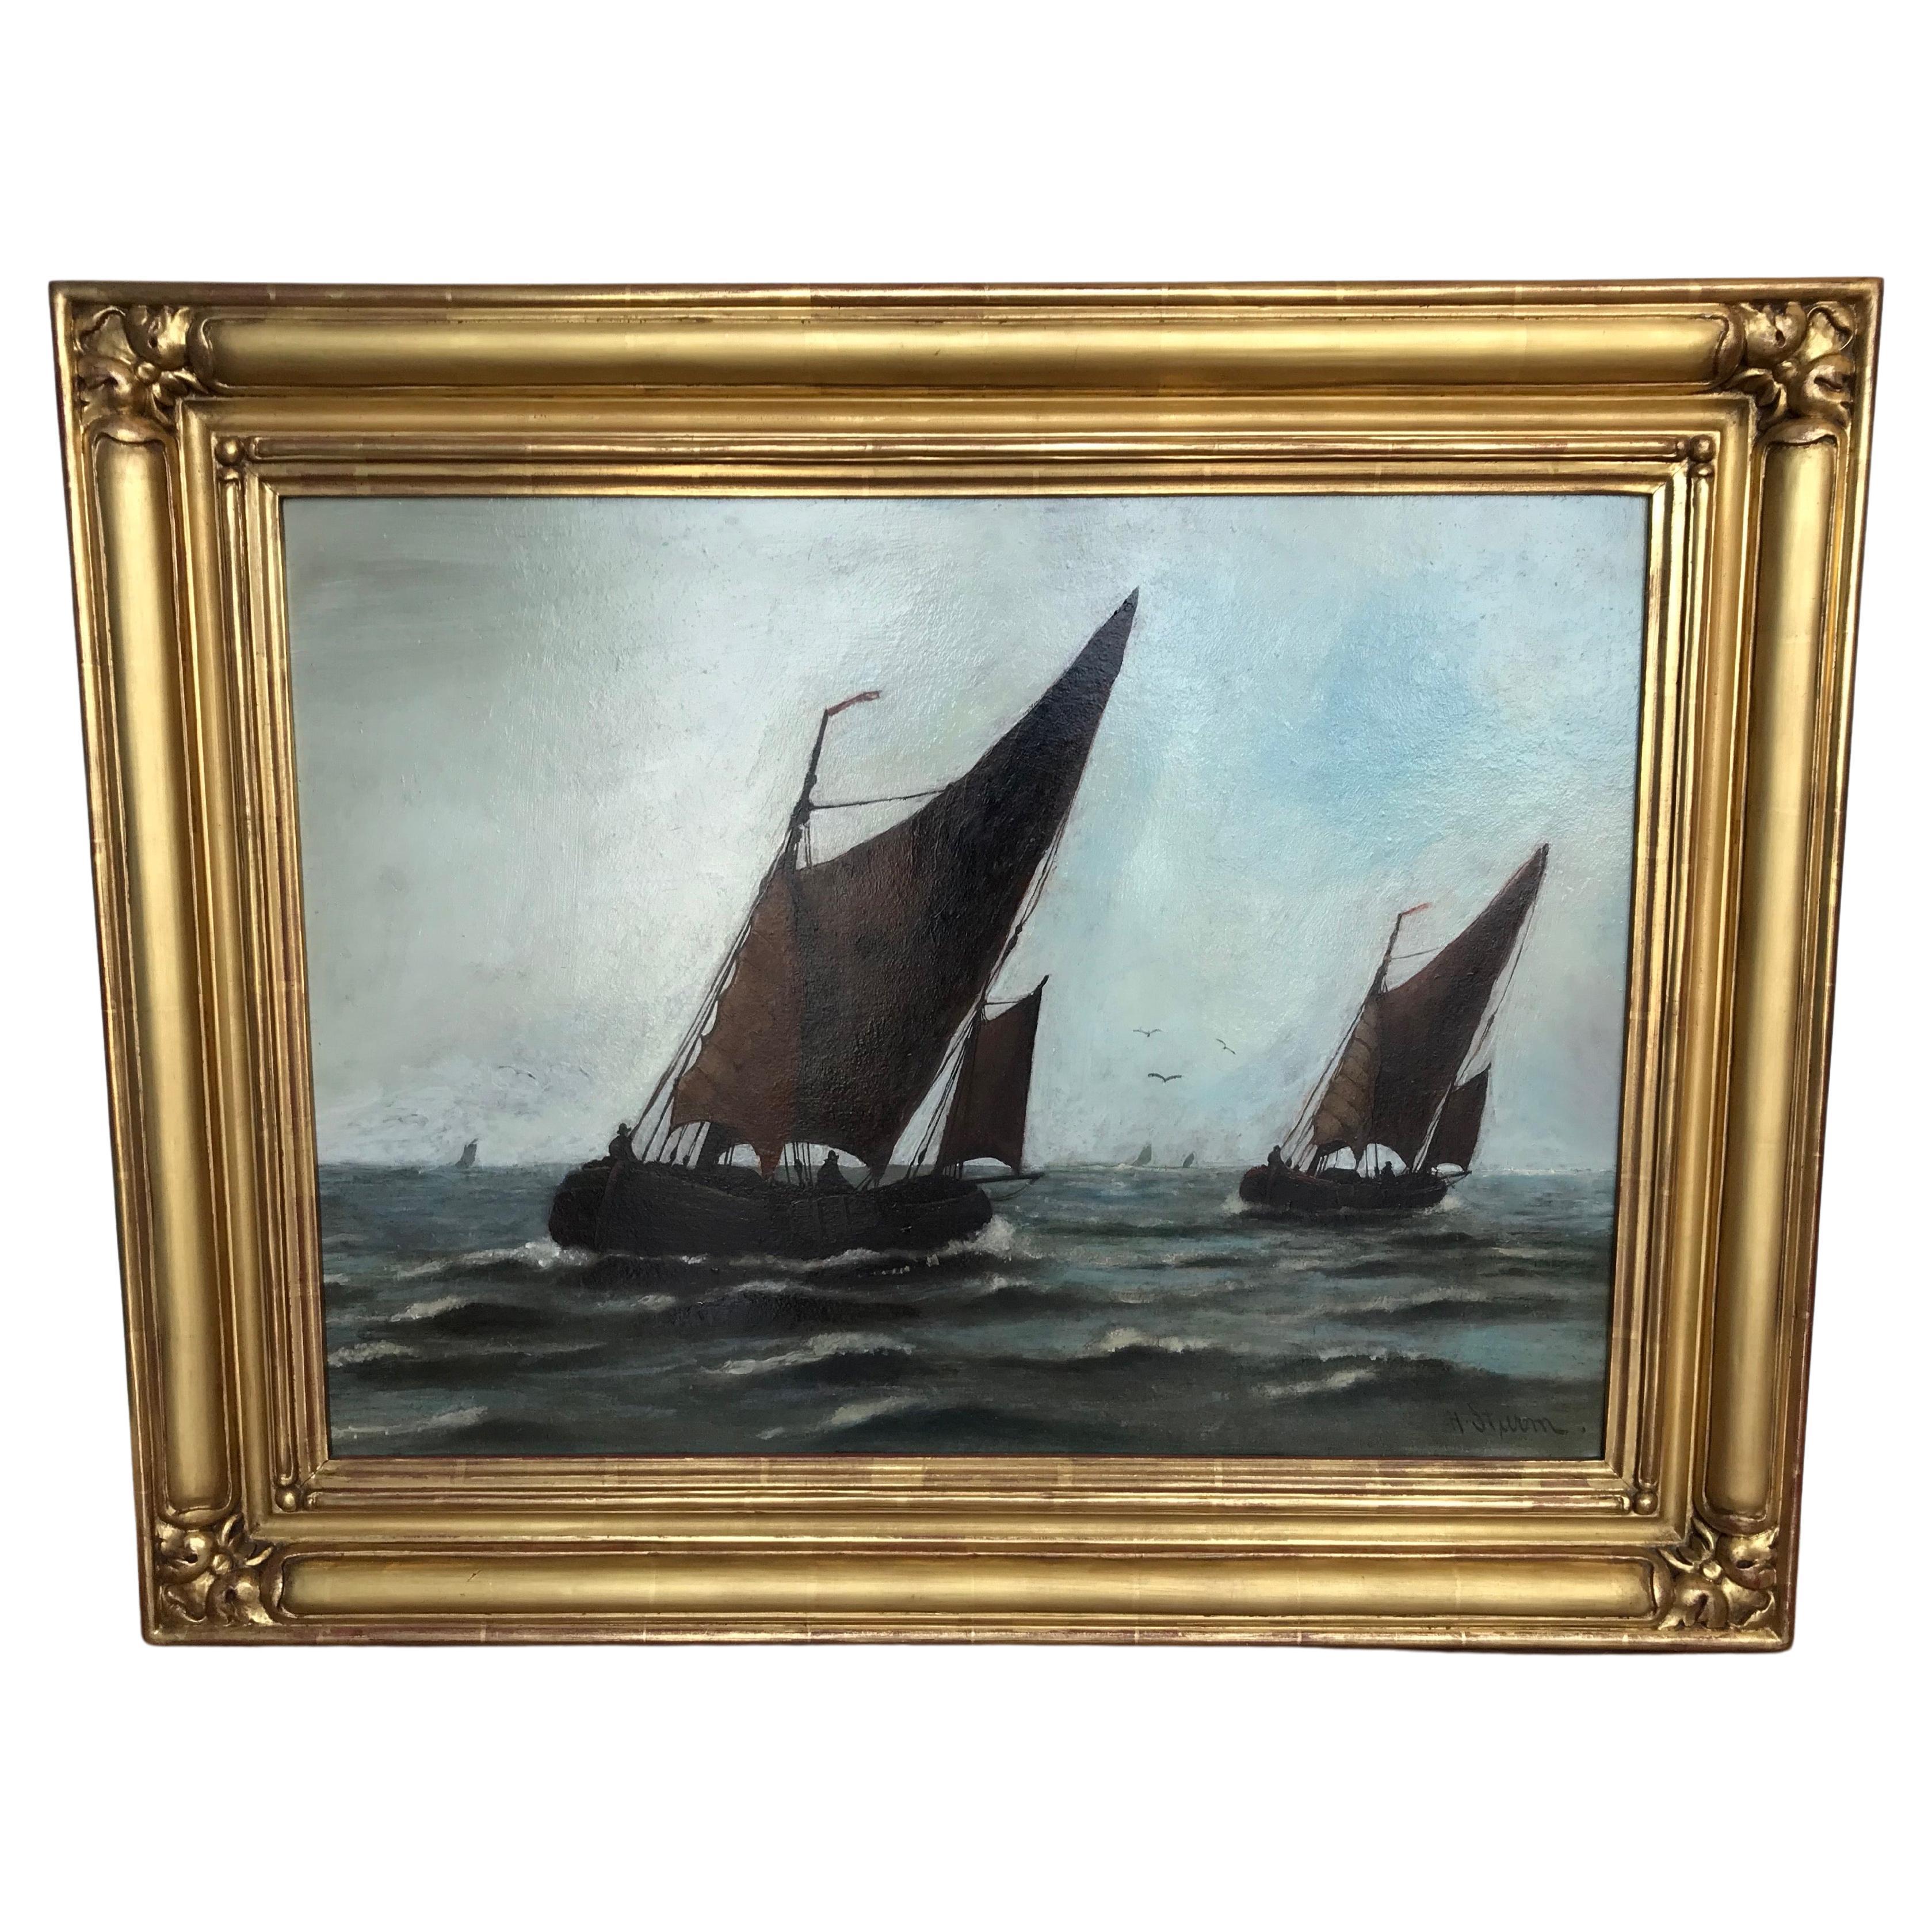 Oil on Board of Sailing Boats by Sturm